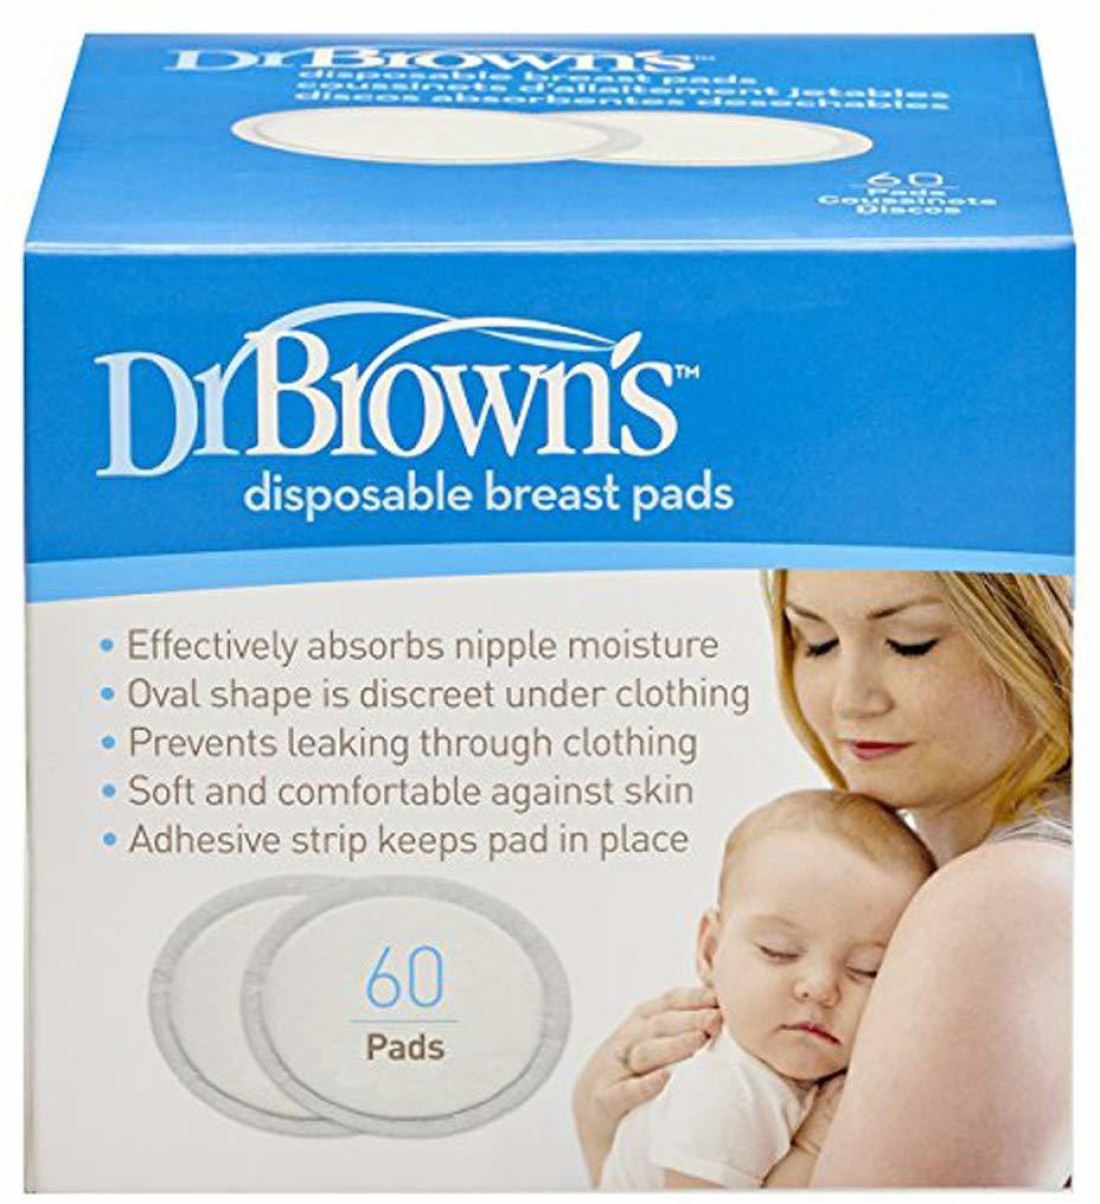 Dr. Brown's Disposable Breast Pad (Oval)